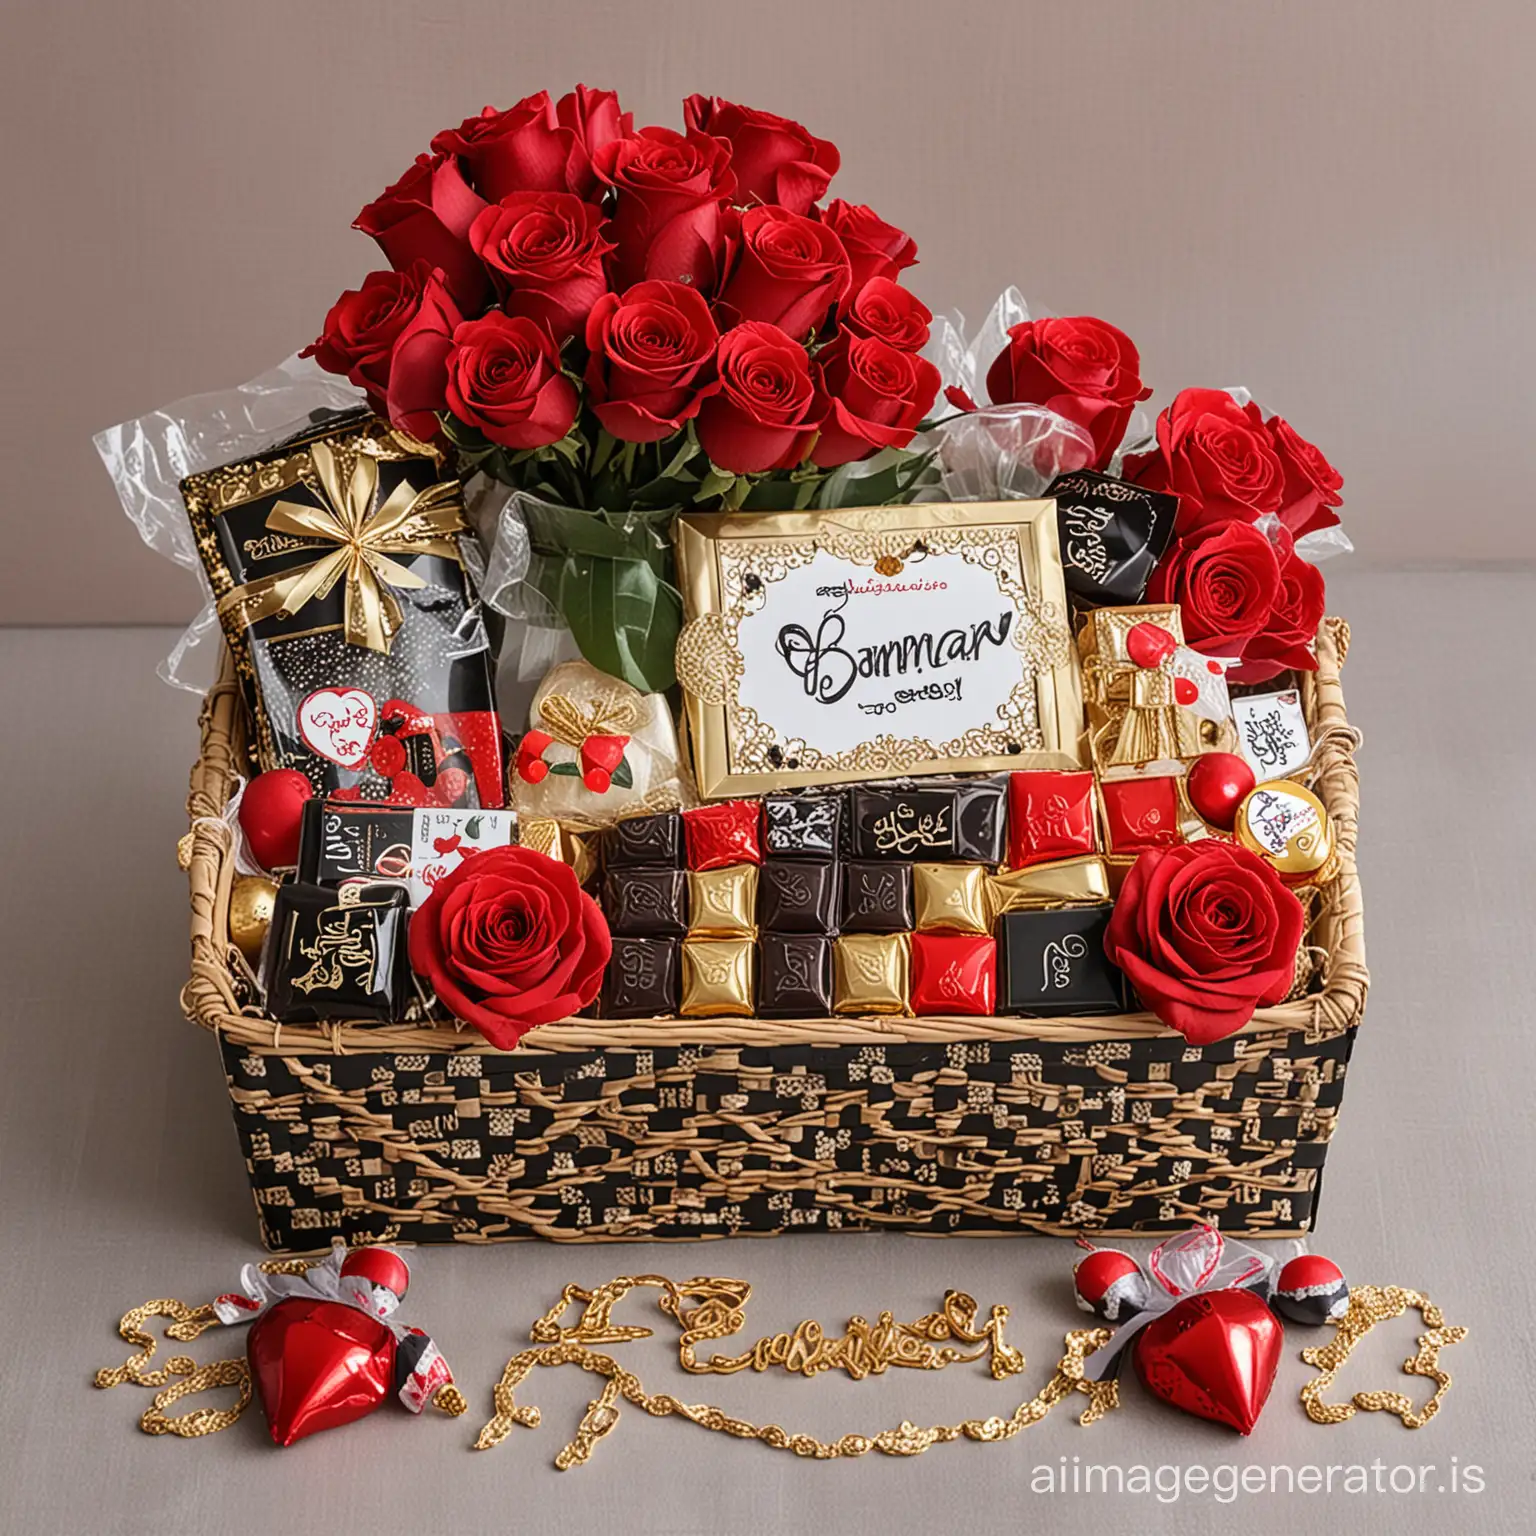 Eid gift basket with red and black roses , chocolates, bangles for girls and with name Eman written on it